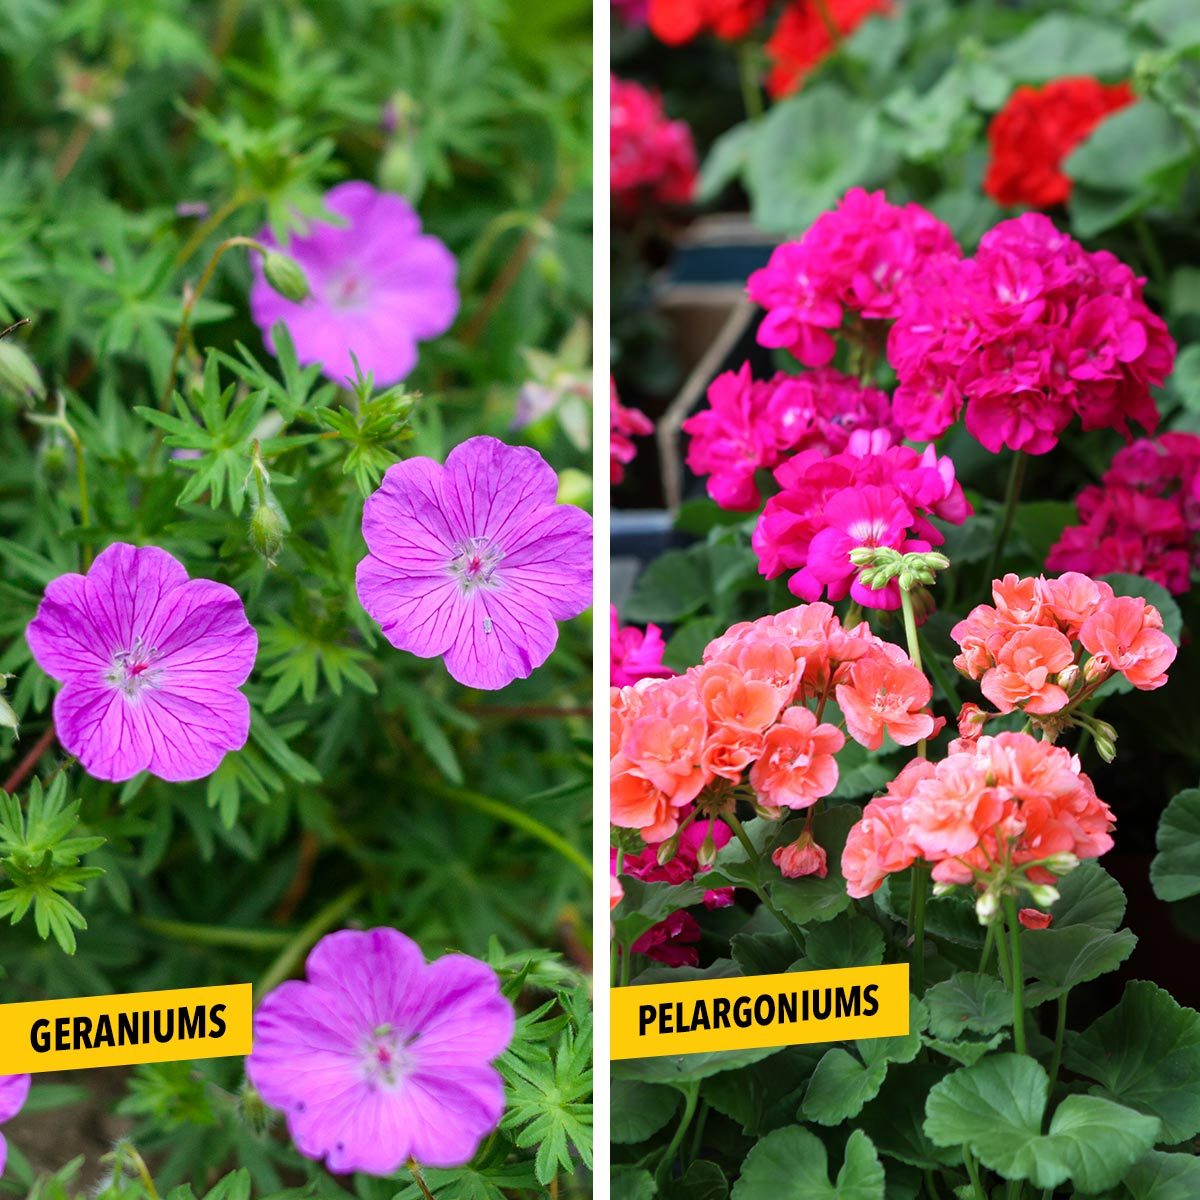 What's the Difference Between Geraniums and Pelargoniums?